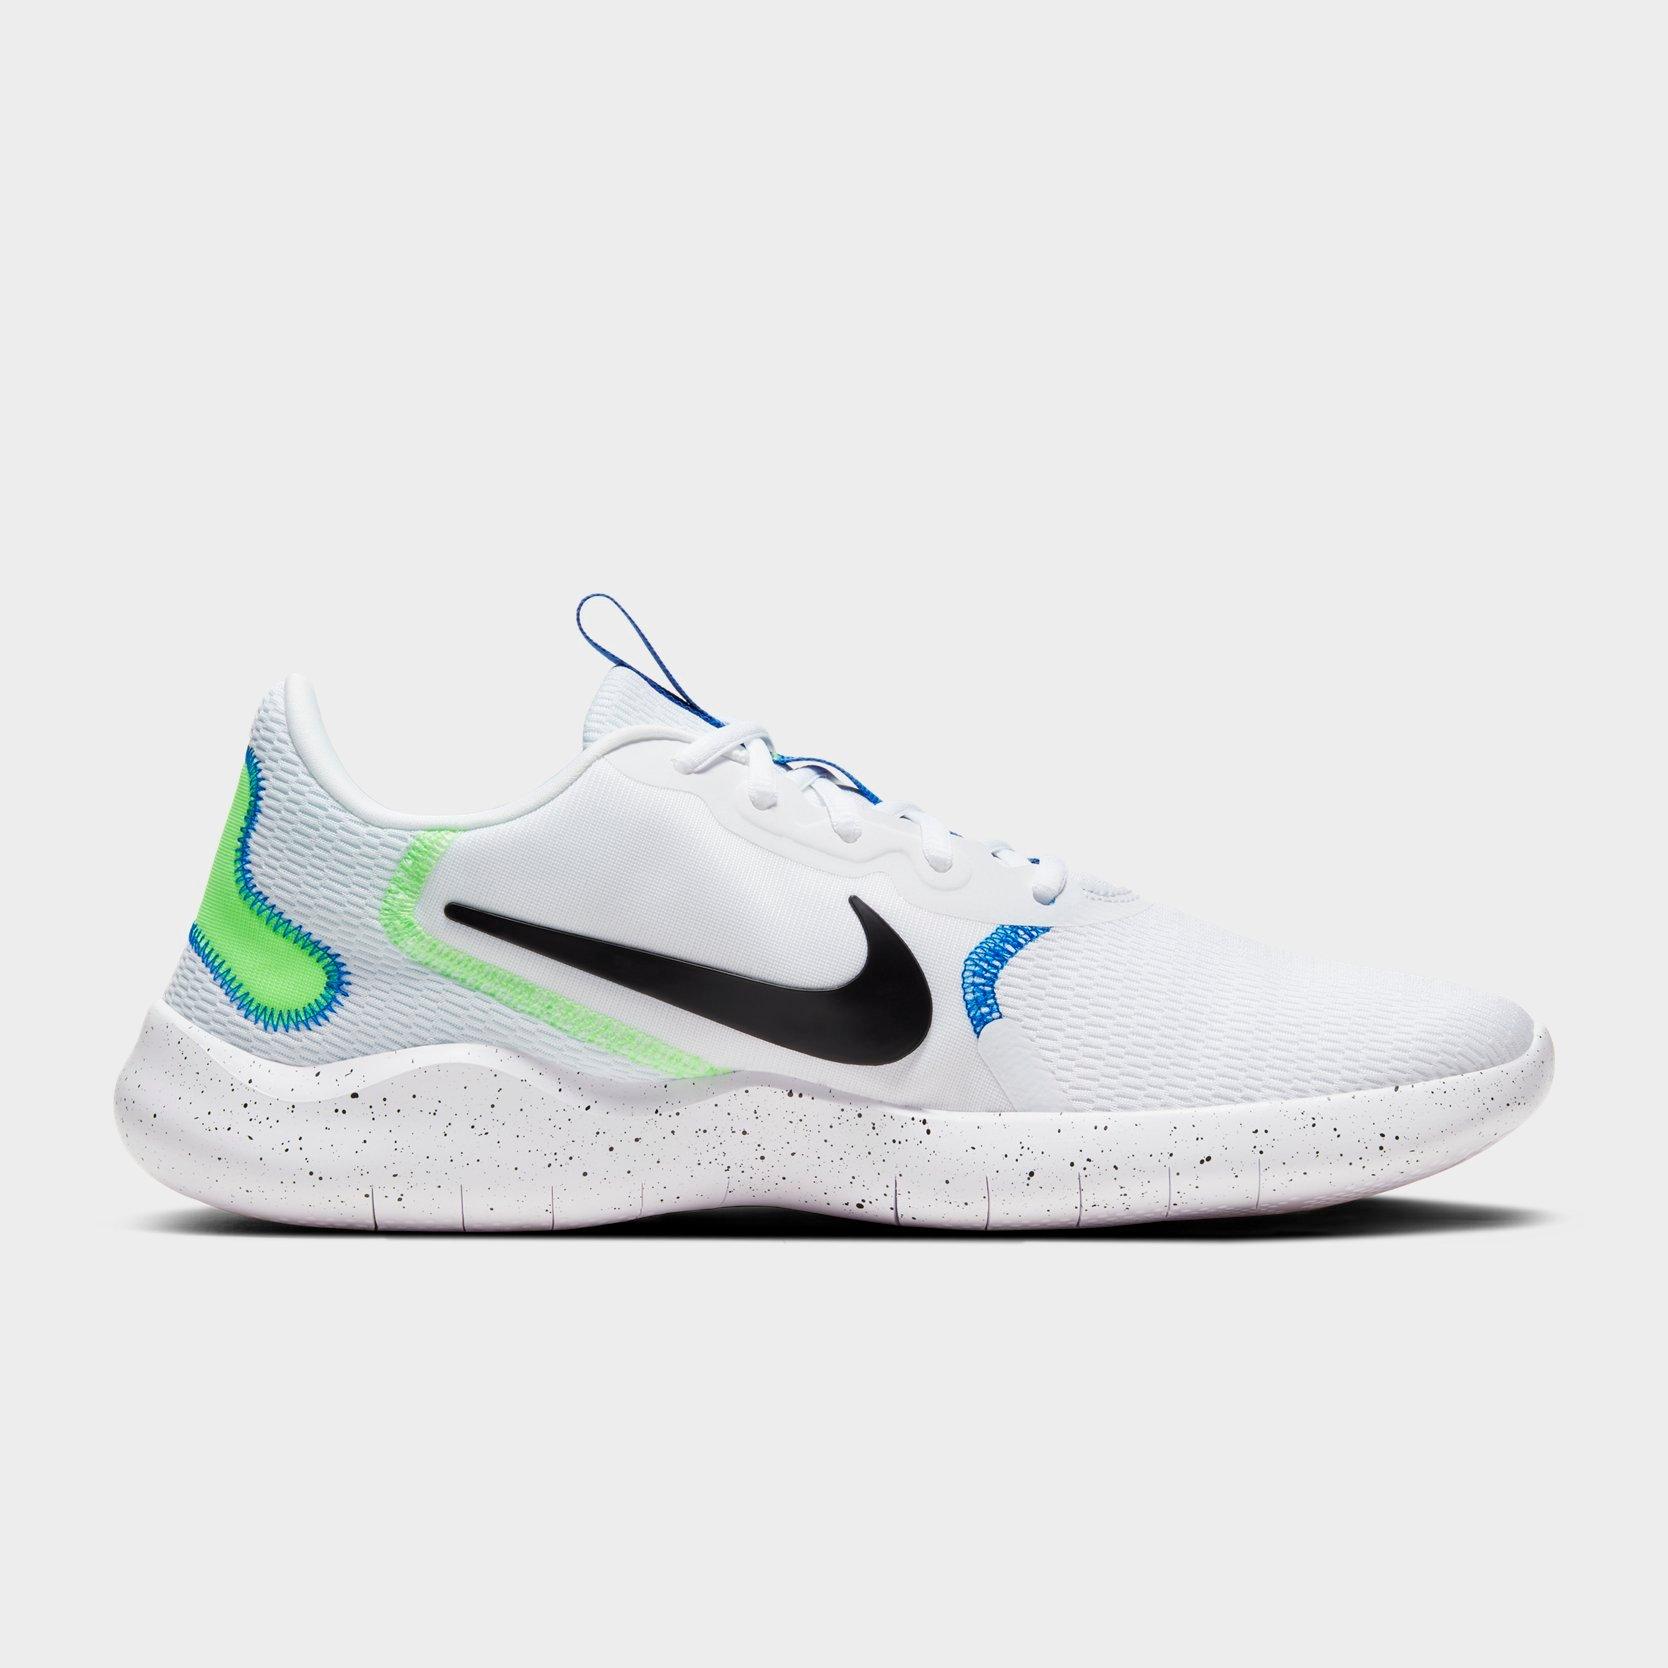 nike men's flex experience running sneakers from finish line